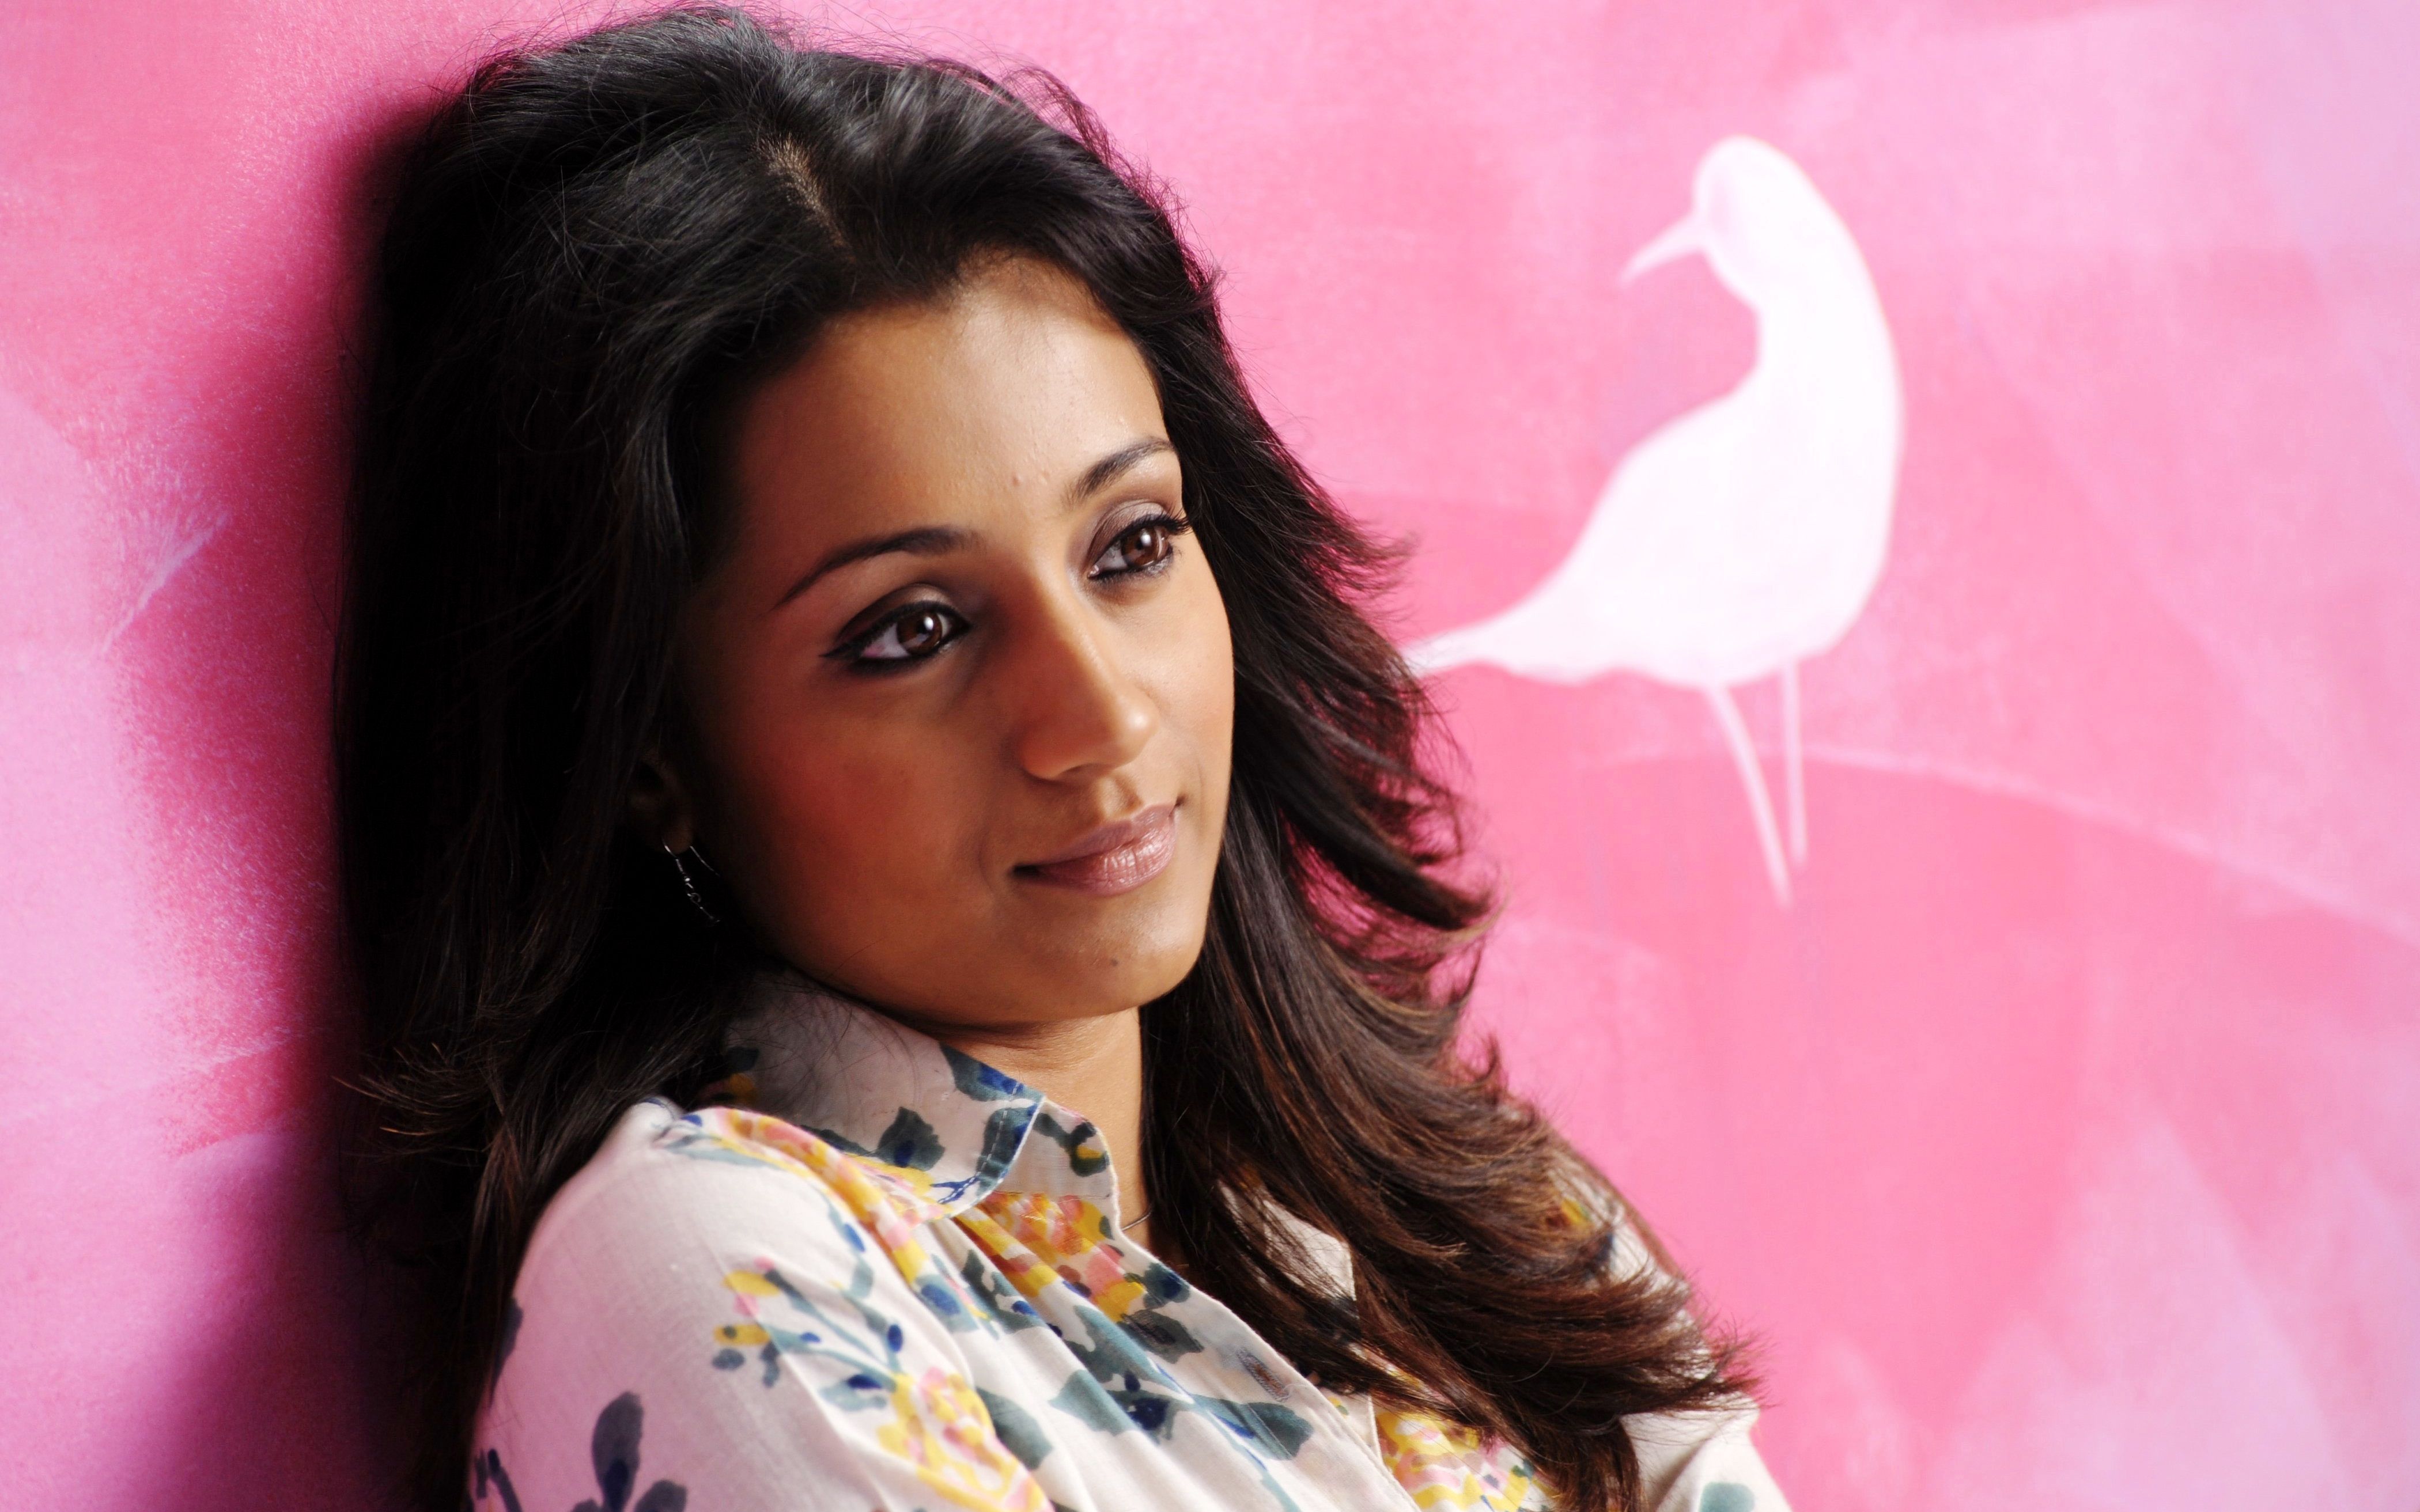 Wallpapers Tagged With TRISHA | TRISHA HD Wallpapers | Page 1